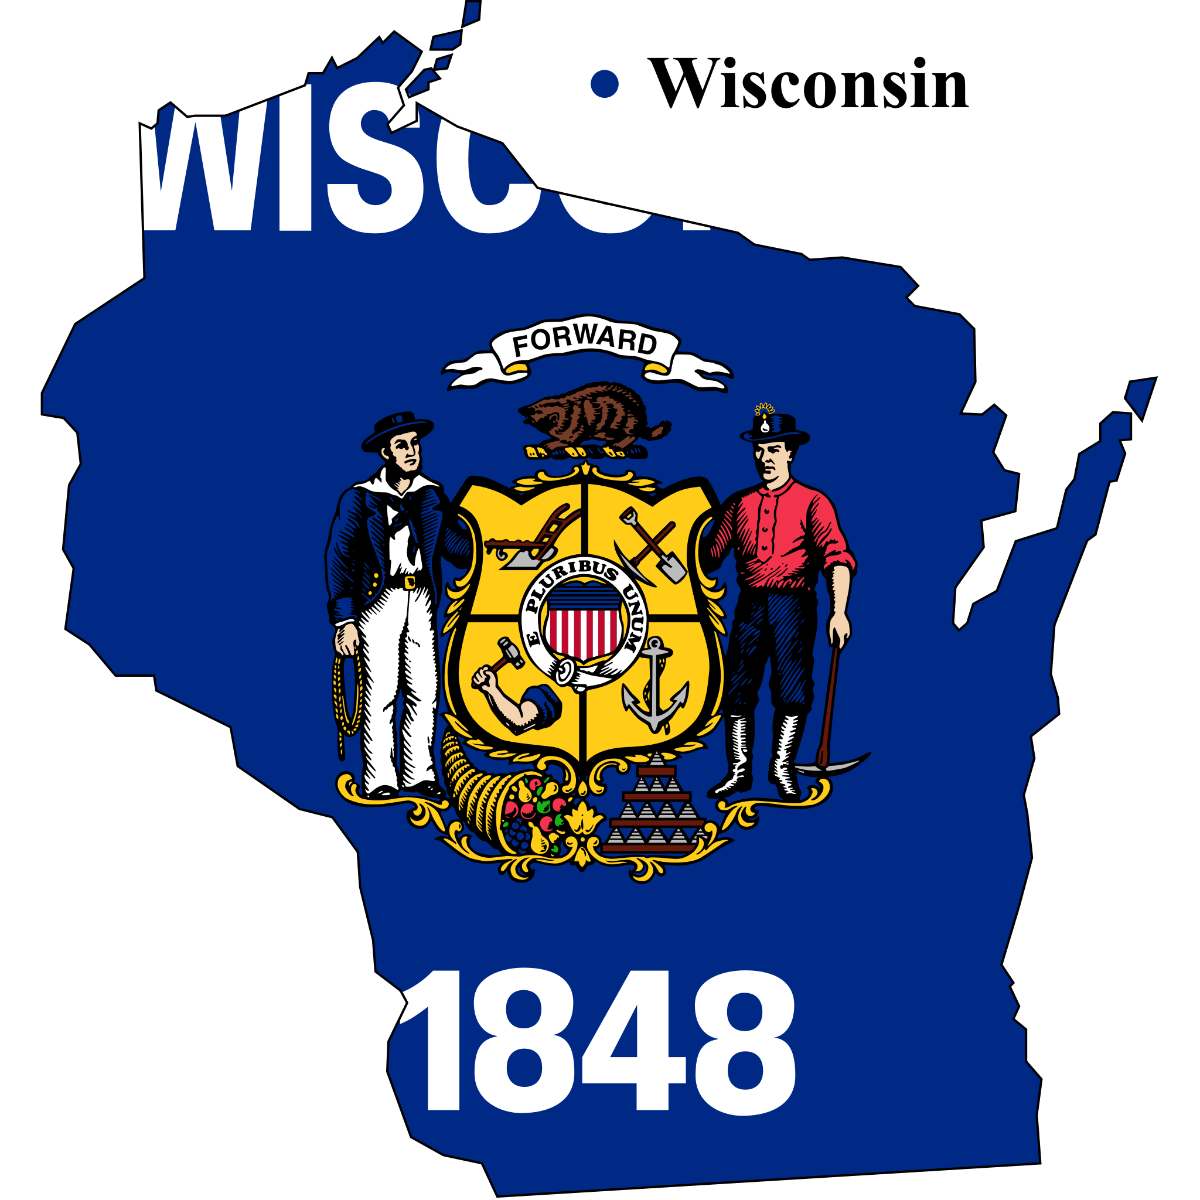 Wisconsin State map cutout with Wisconsin flag superimposed